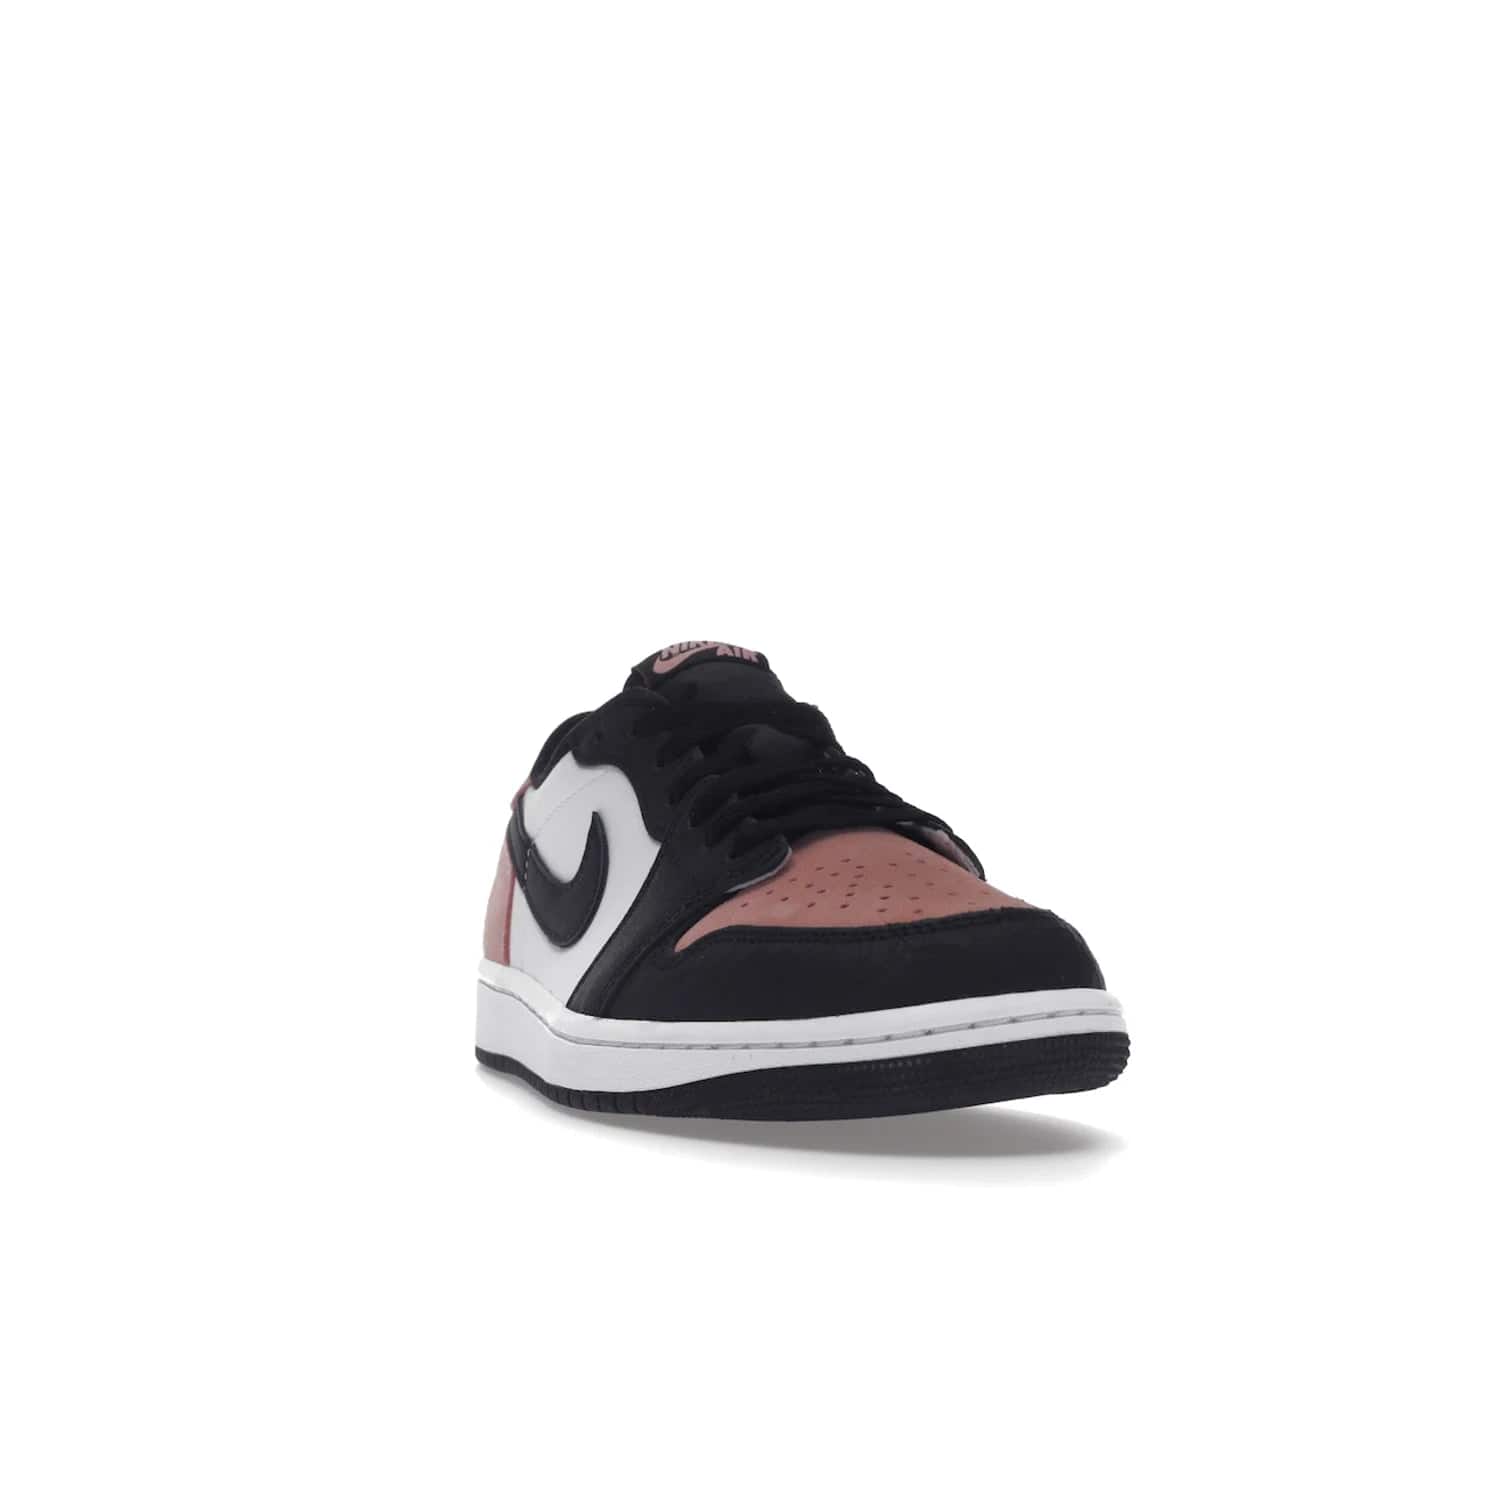 Jordan 1 Low OG Bleached Coral - Image 8 - Only at www.BallersClubKickz.com - Introducing the Air Jordan 1 Low OG Bleached Coral. Constructed with white leather, black cracked leather & Bleached Coral suede. Signature Jordan Wings logo, white Air sole. Get the pack in July 2022 and stand out.